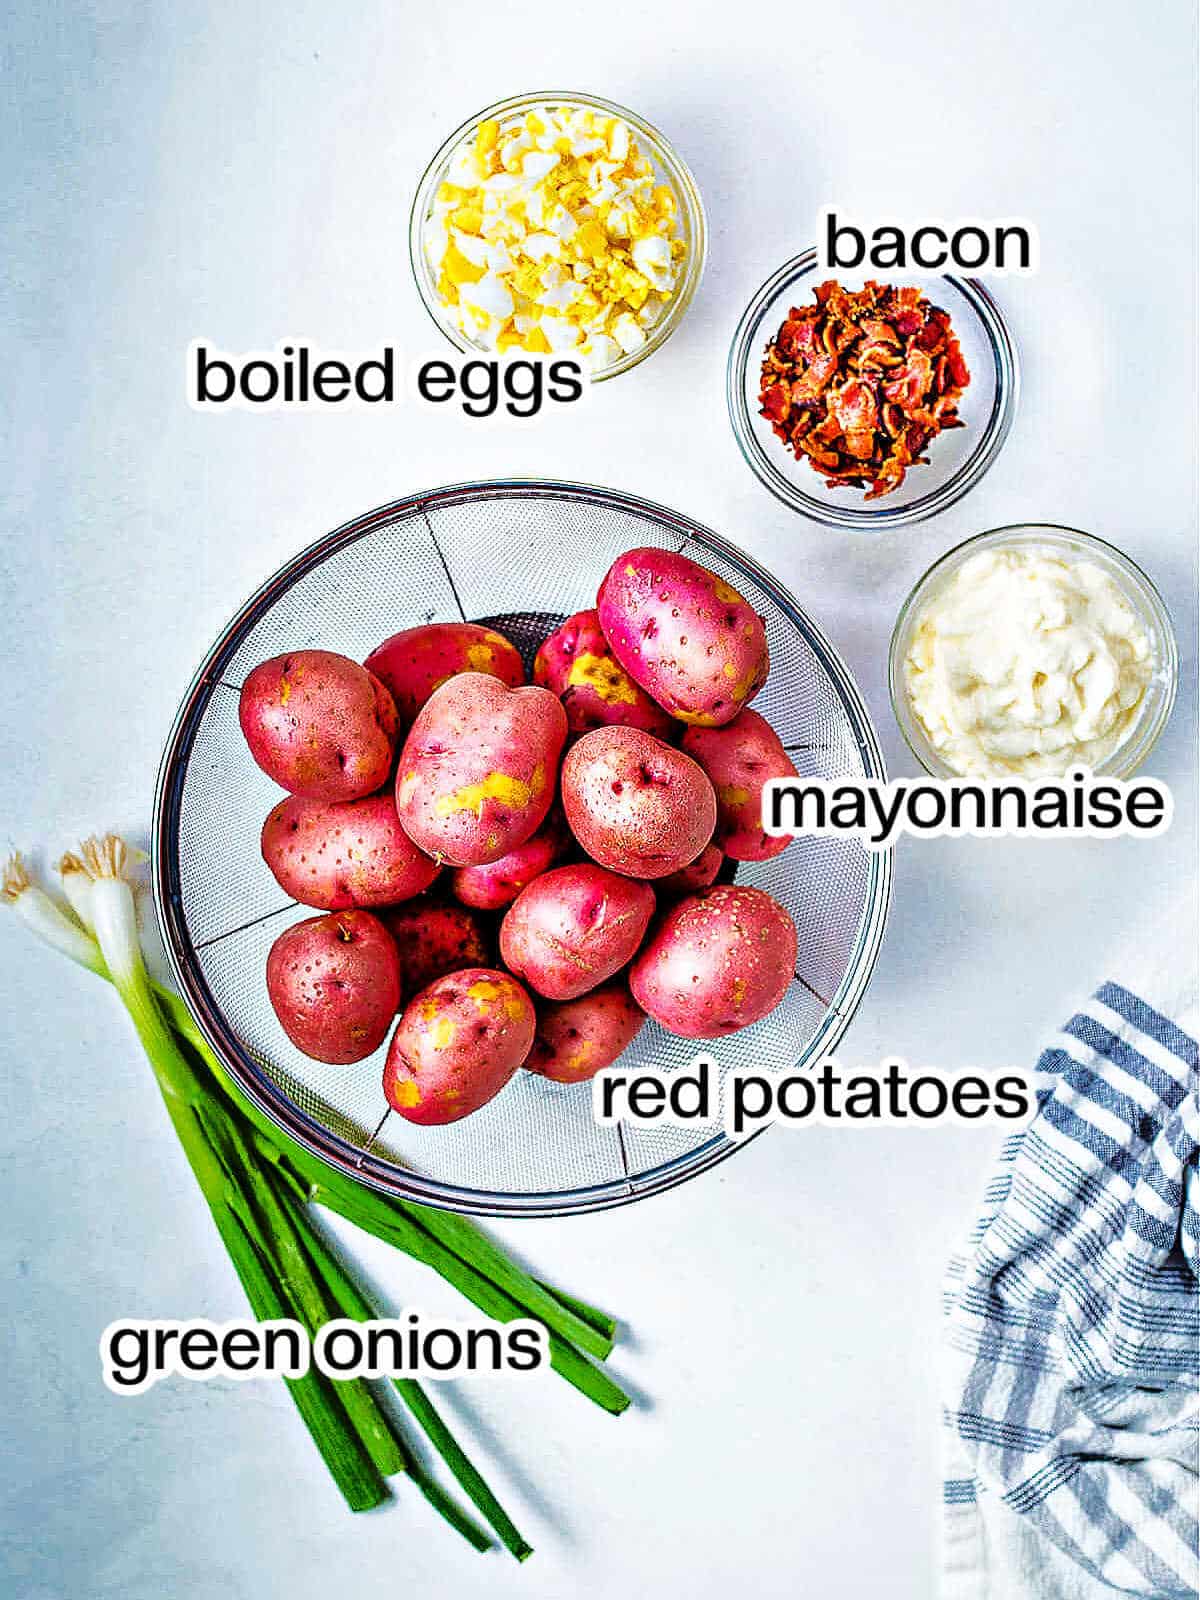 Ingredients for red potato salad on a table.